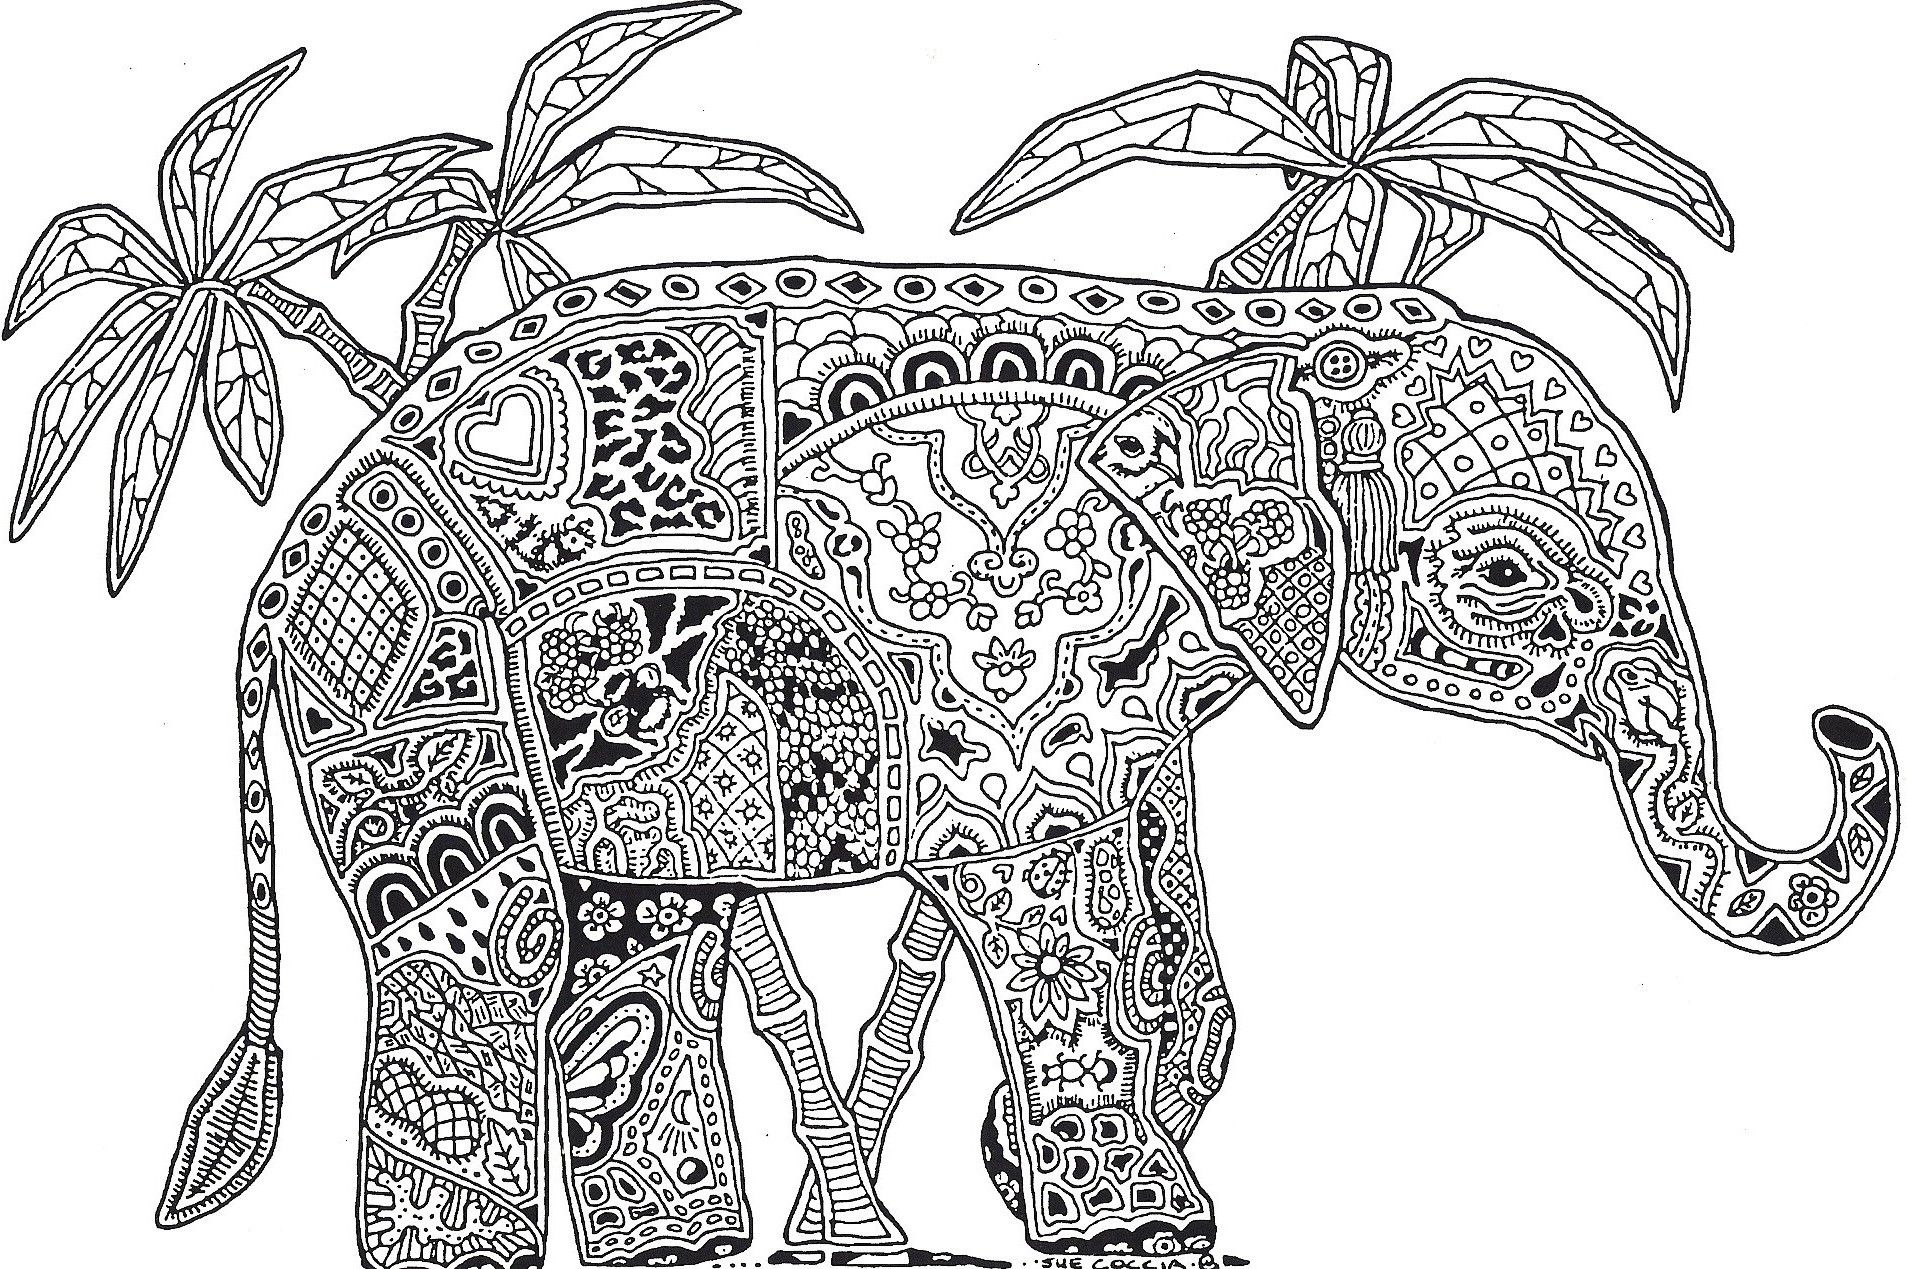 Colouring pages | Coloring pages ...